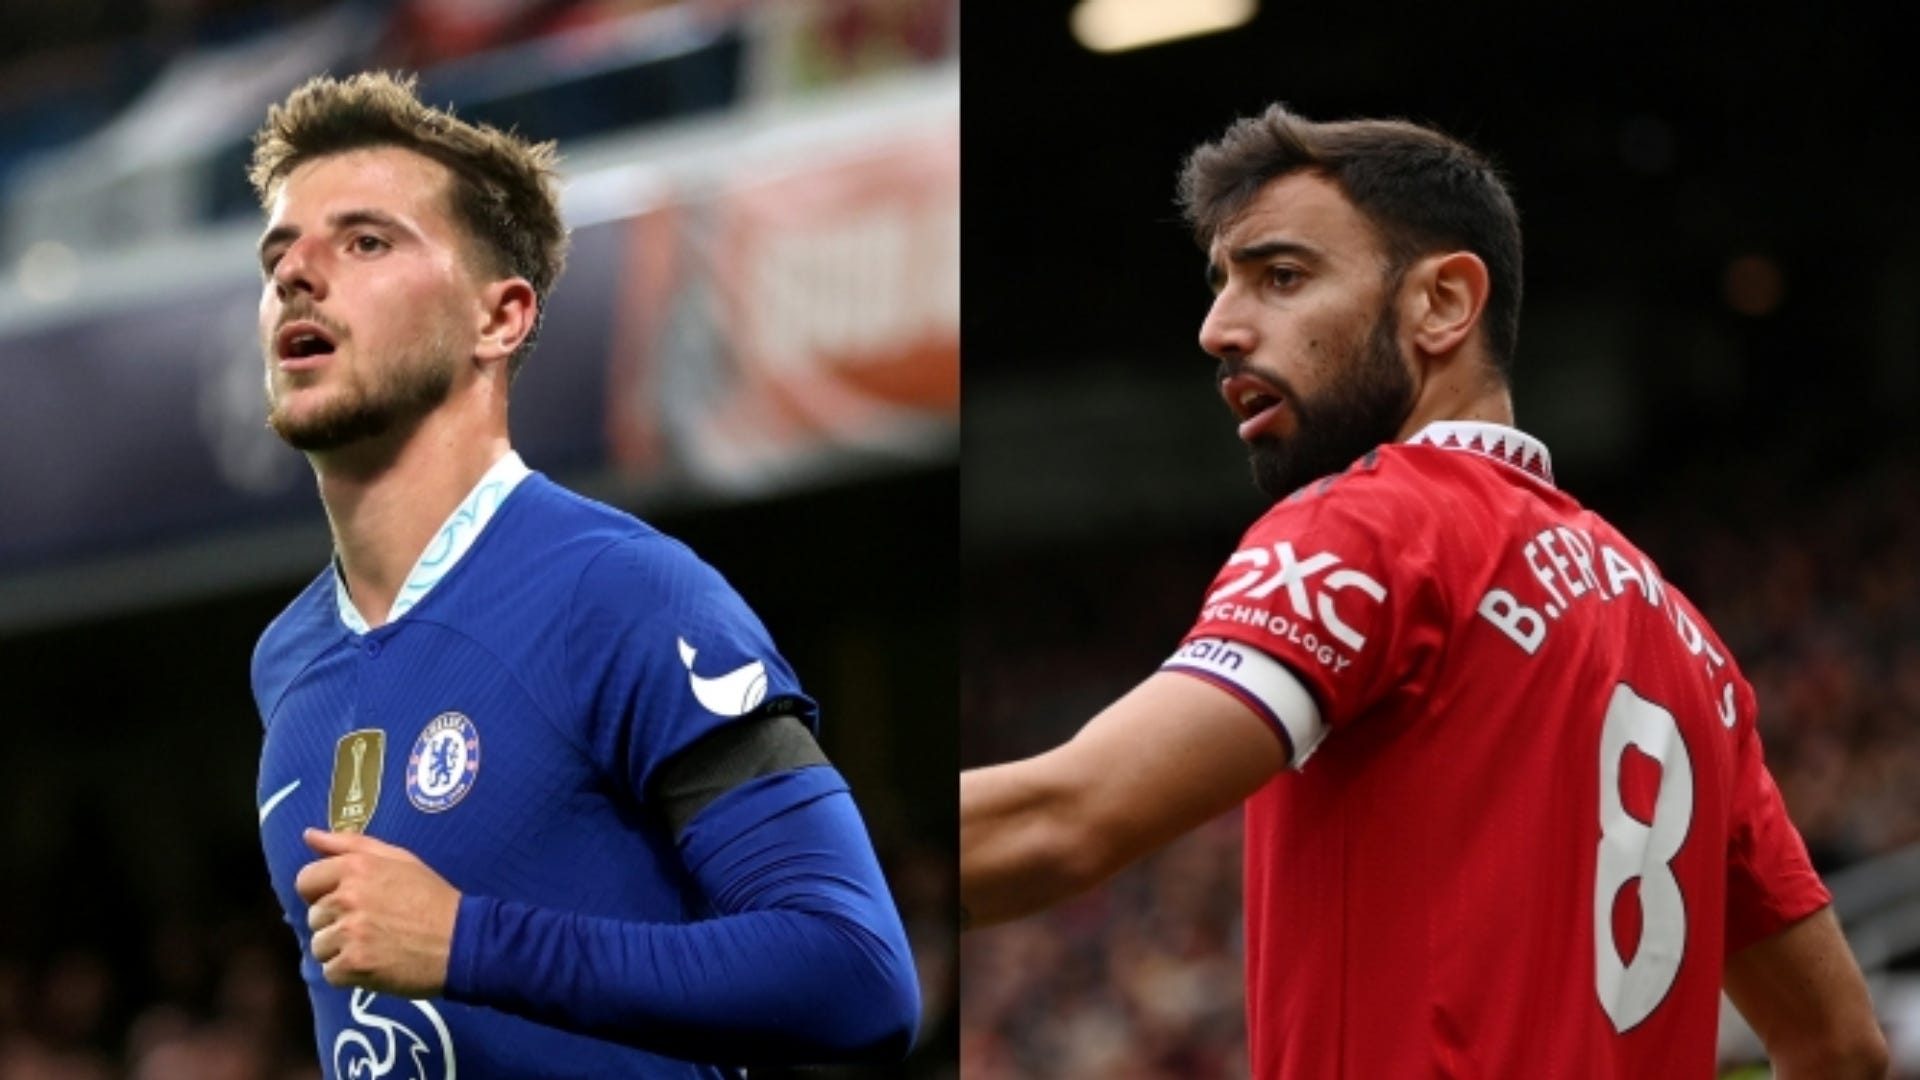 How to watch Chelsea vs Man Utd in Singapore Live stream, TV channel, StarHub subscription, kick-off time and team news Goal English Oman